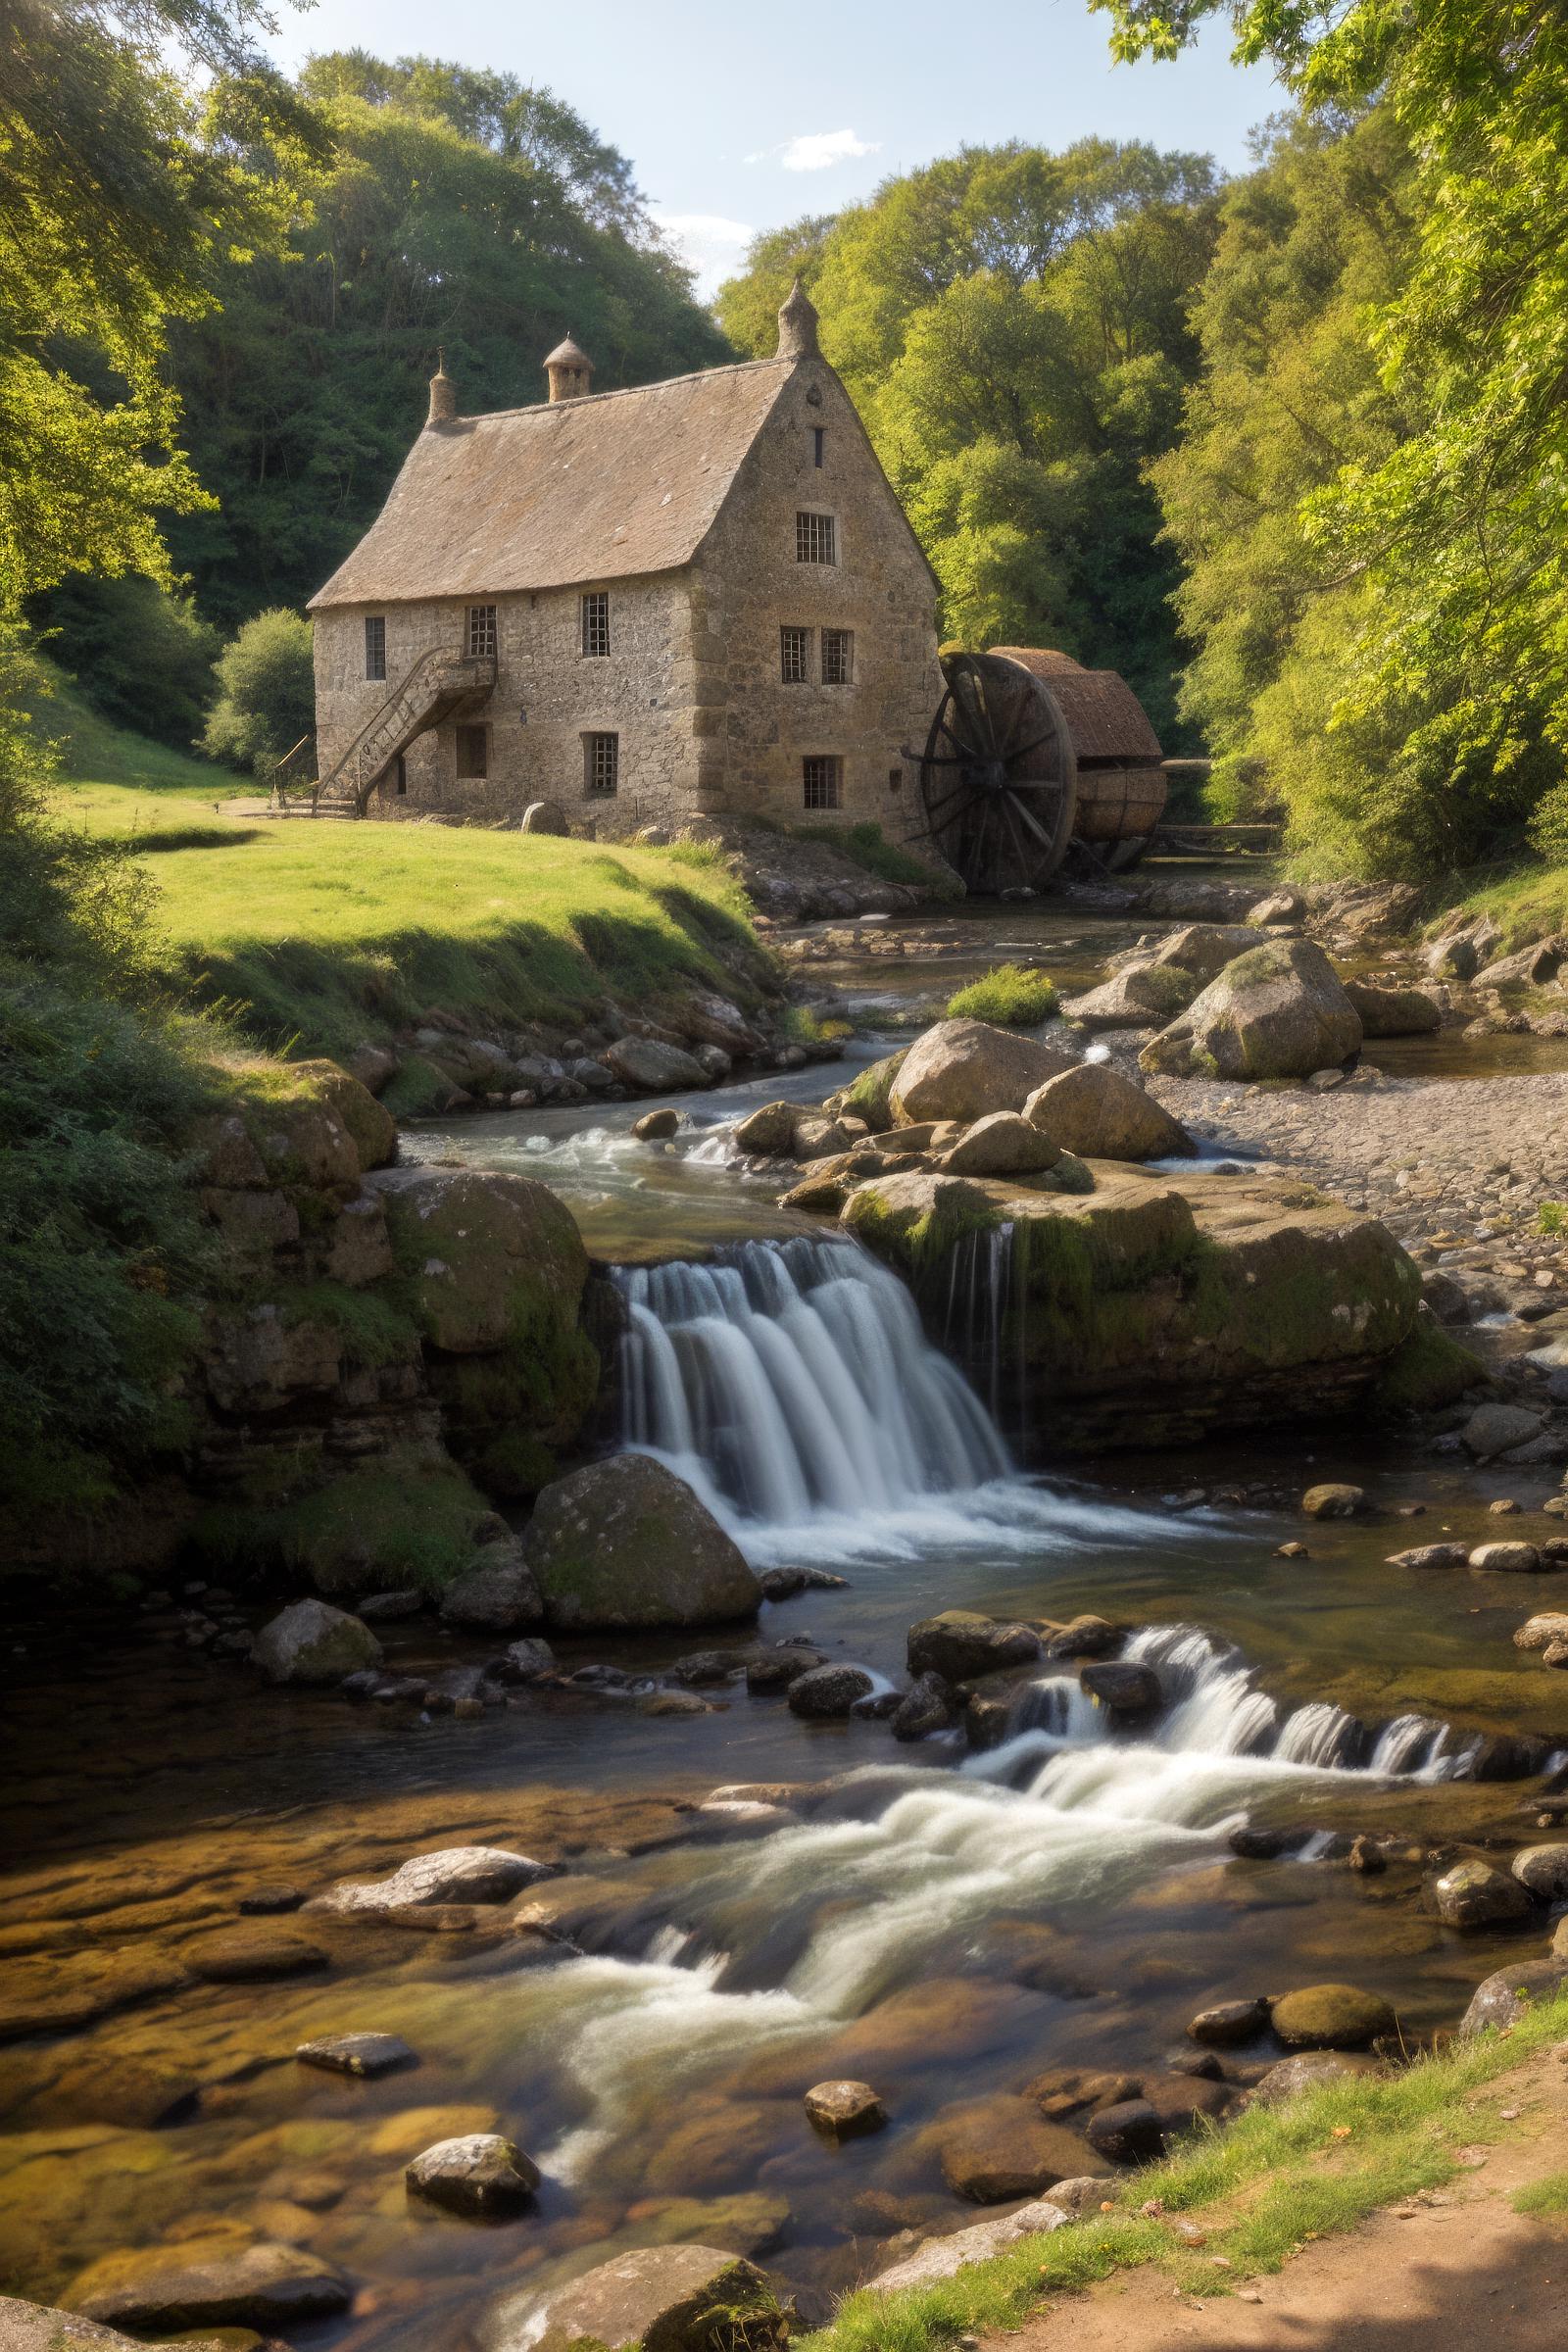 A waterfall with a stone house in the background.